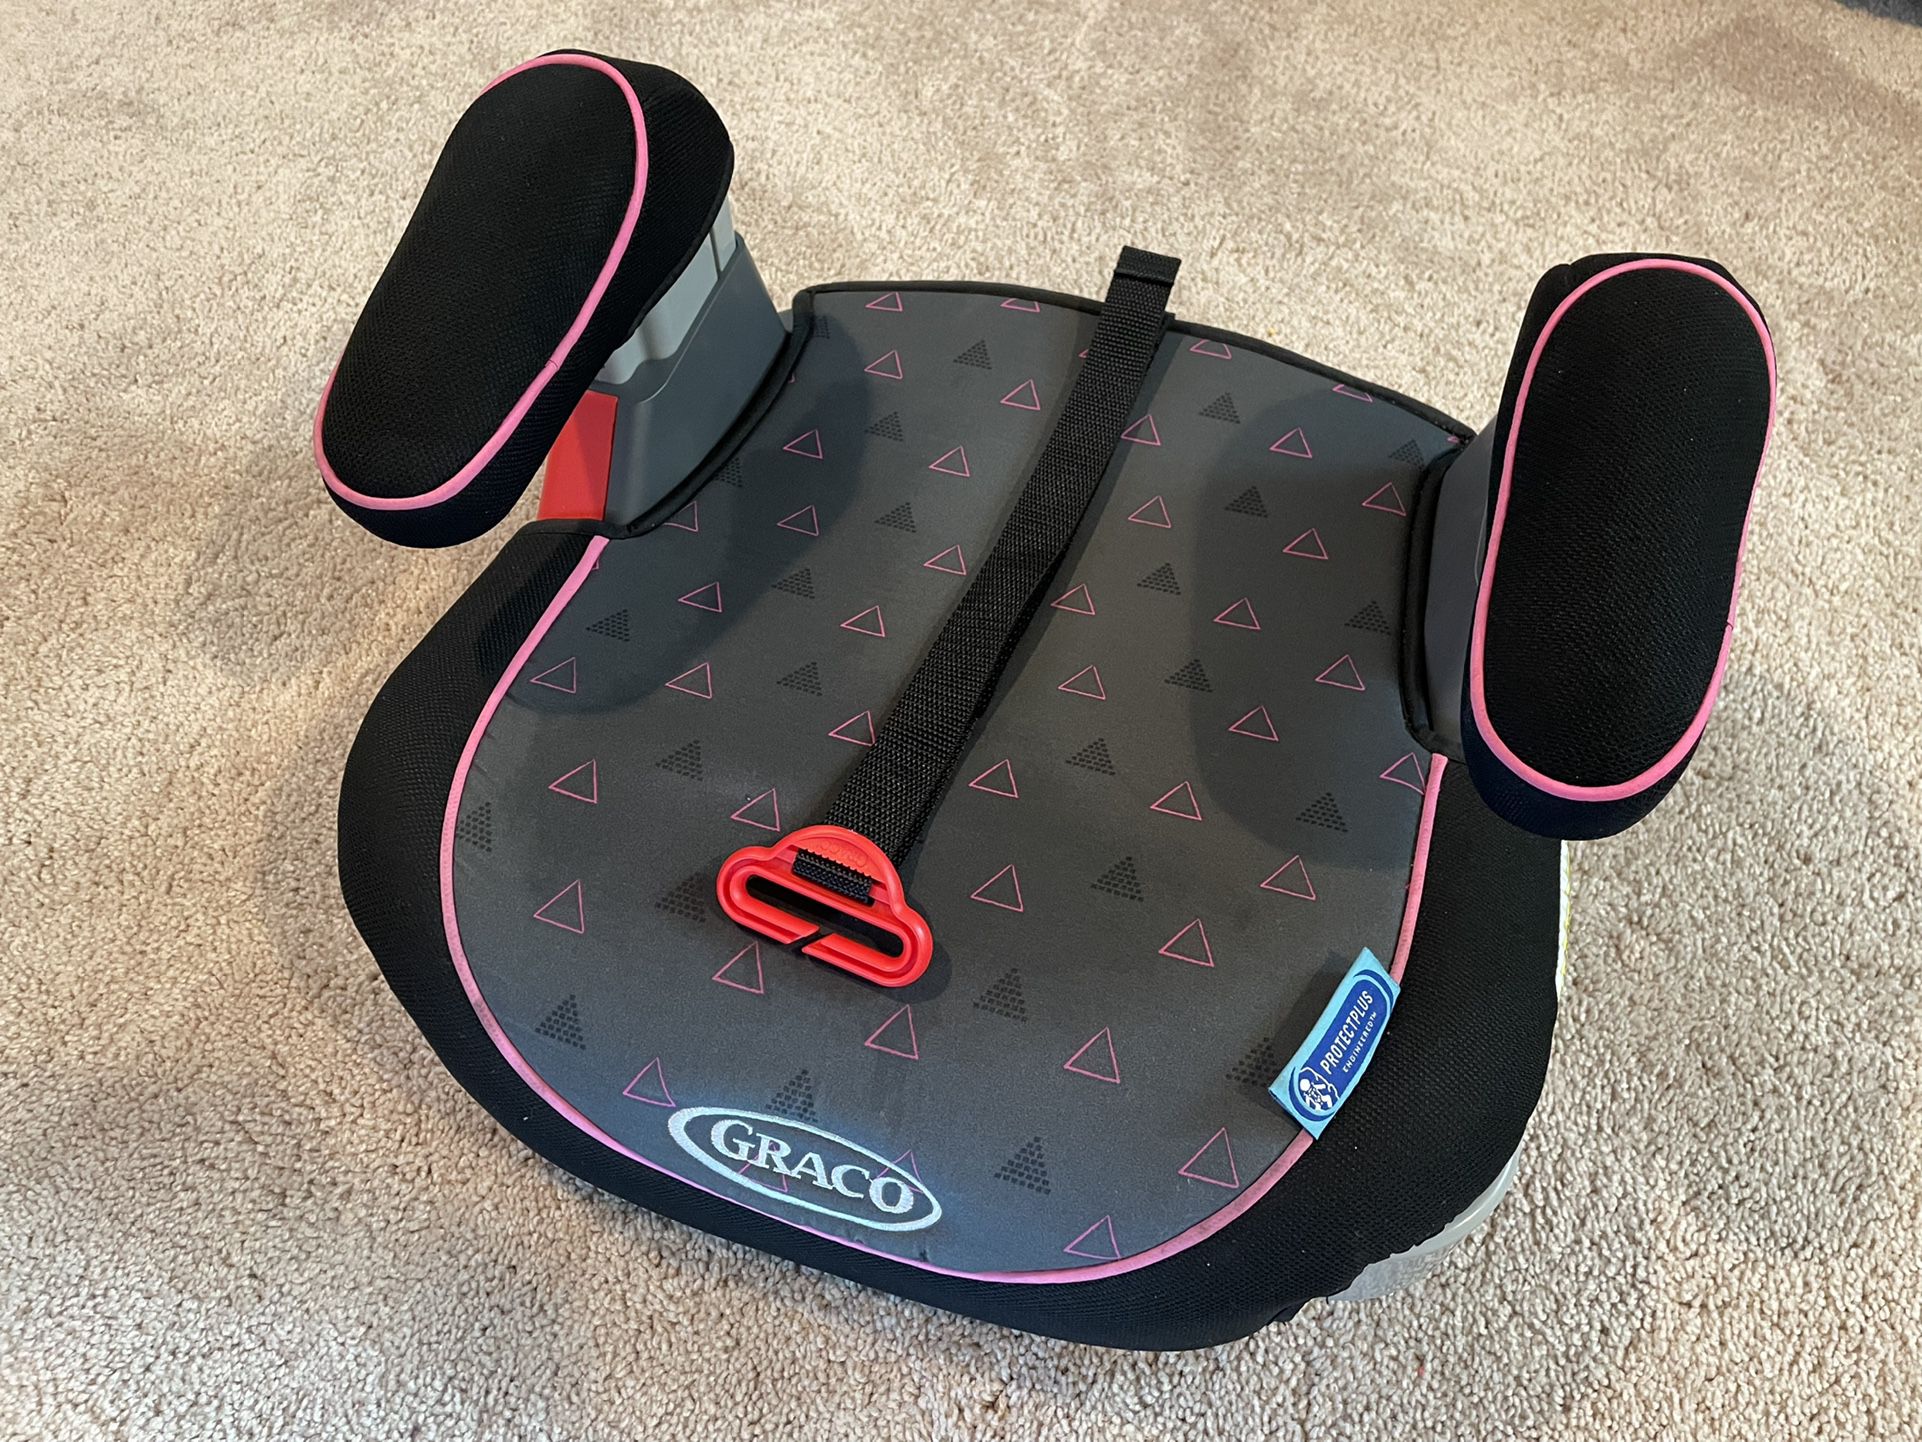 Available one Graco Turbo Booster Backless Car Seat $15.00.